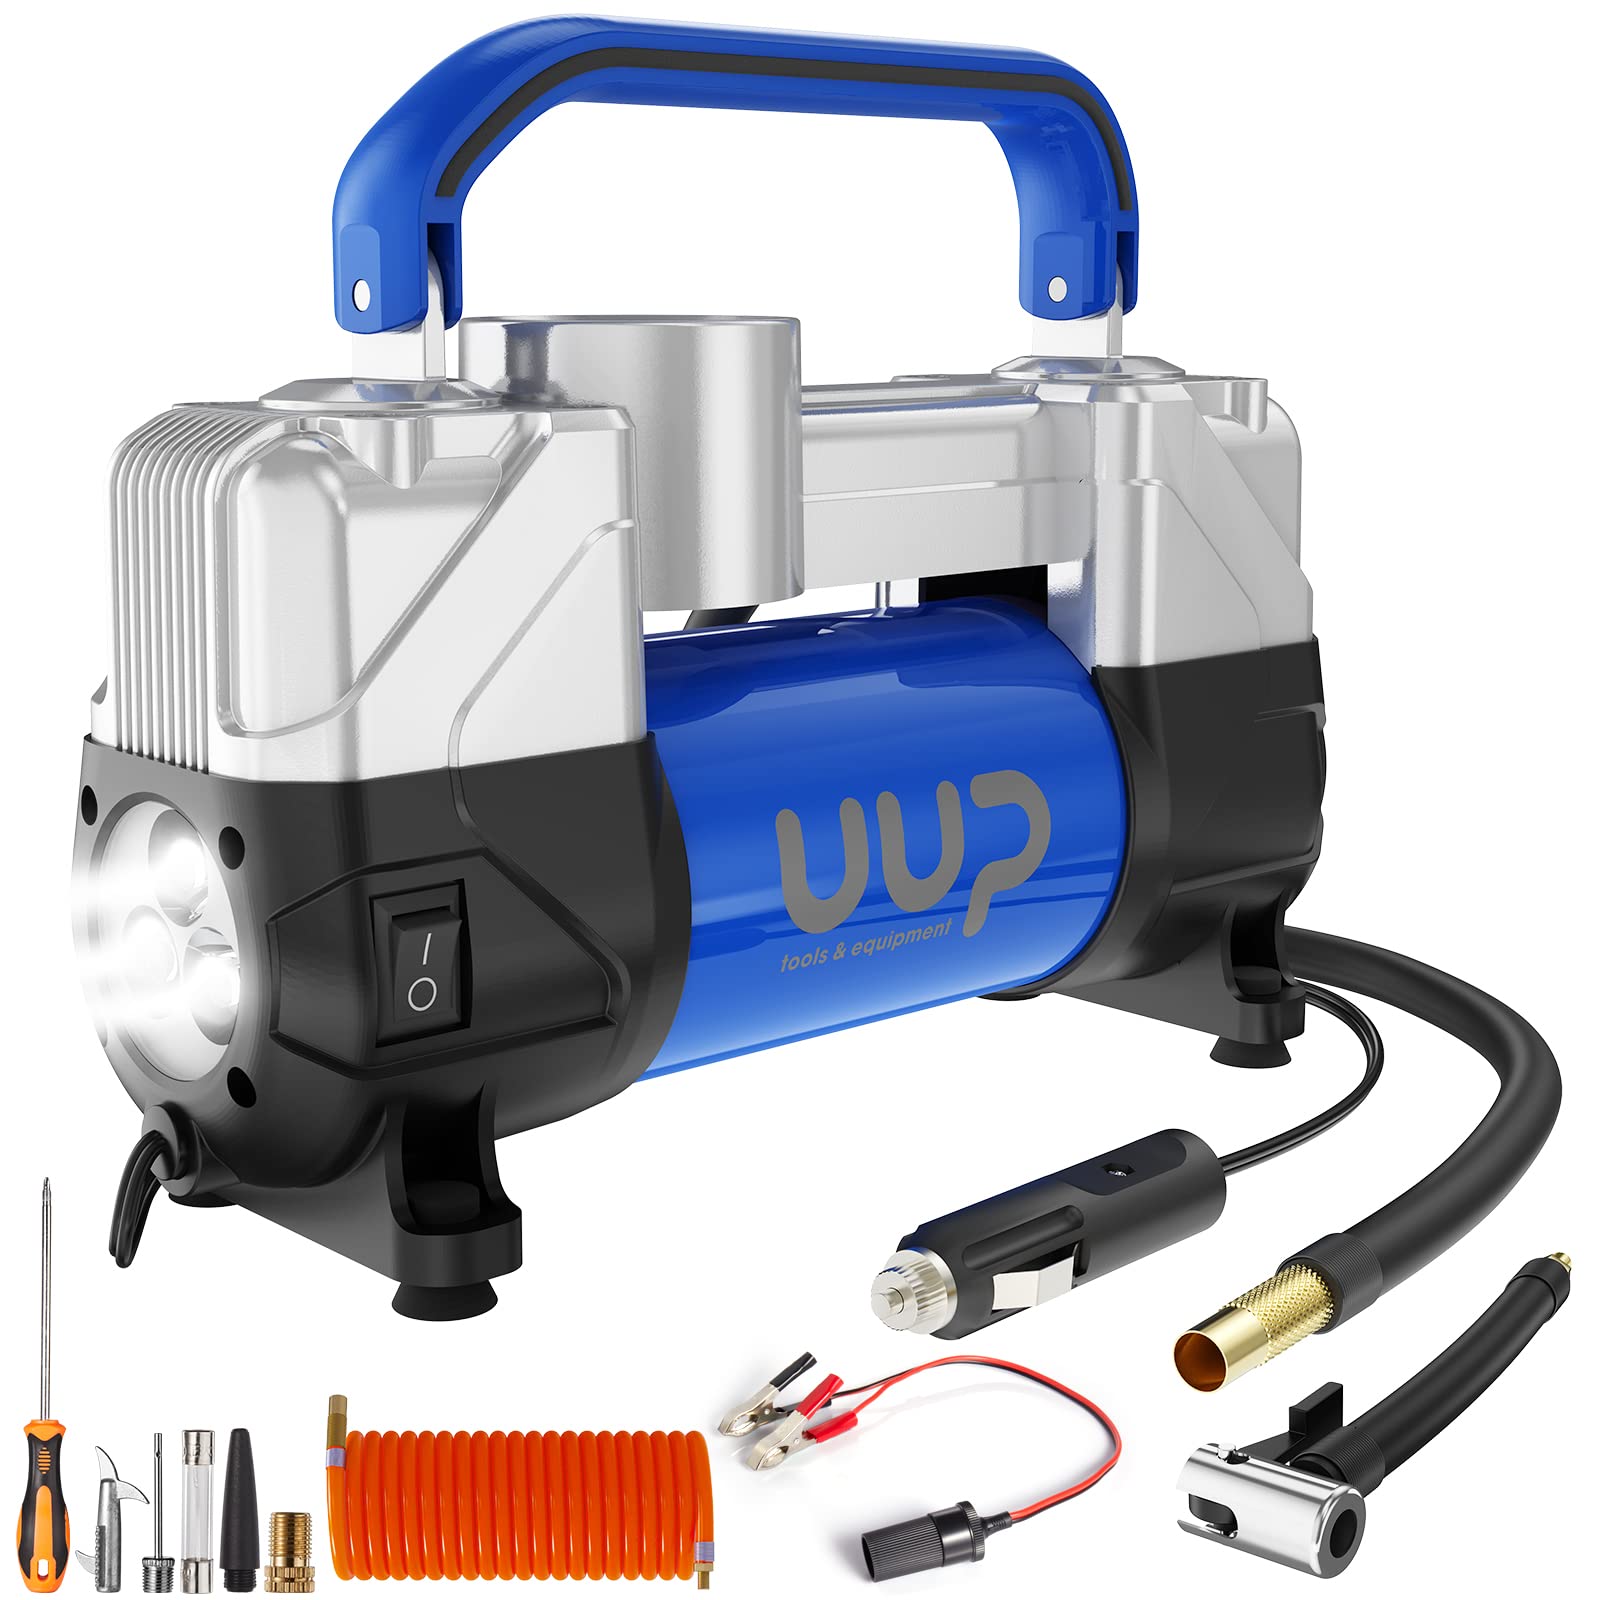 Uup Tire Inflator Air Compressor, 150Psi 12V Dc Double Cylinders Heavy Duty Portable Air Pump Wemergency Led Light For Truck, Su